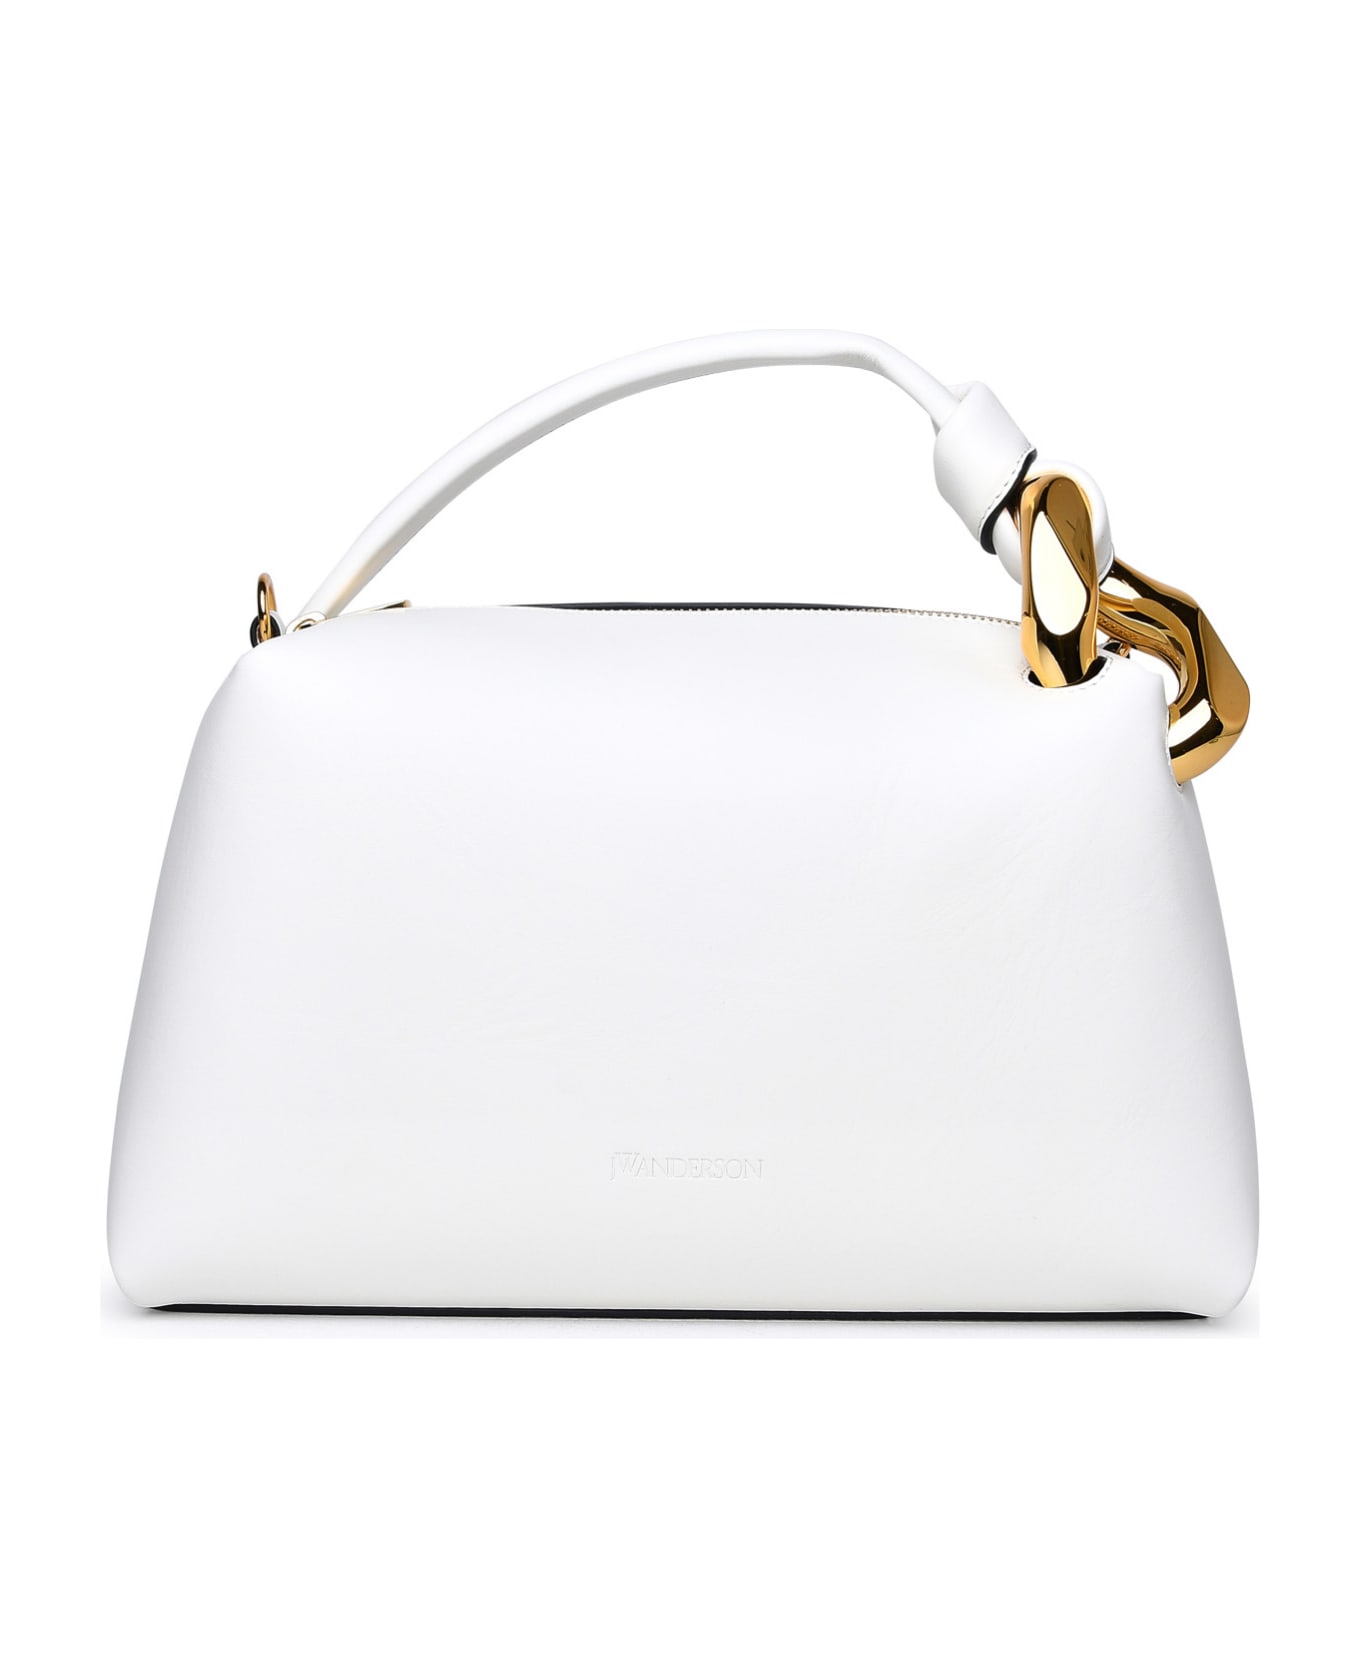 J.W. Anderson White Leather Bag - White